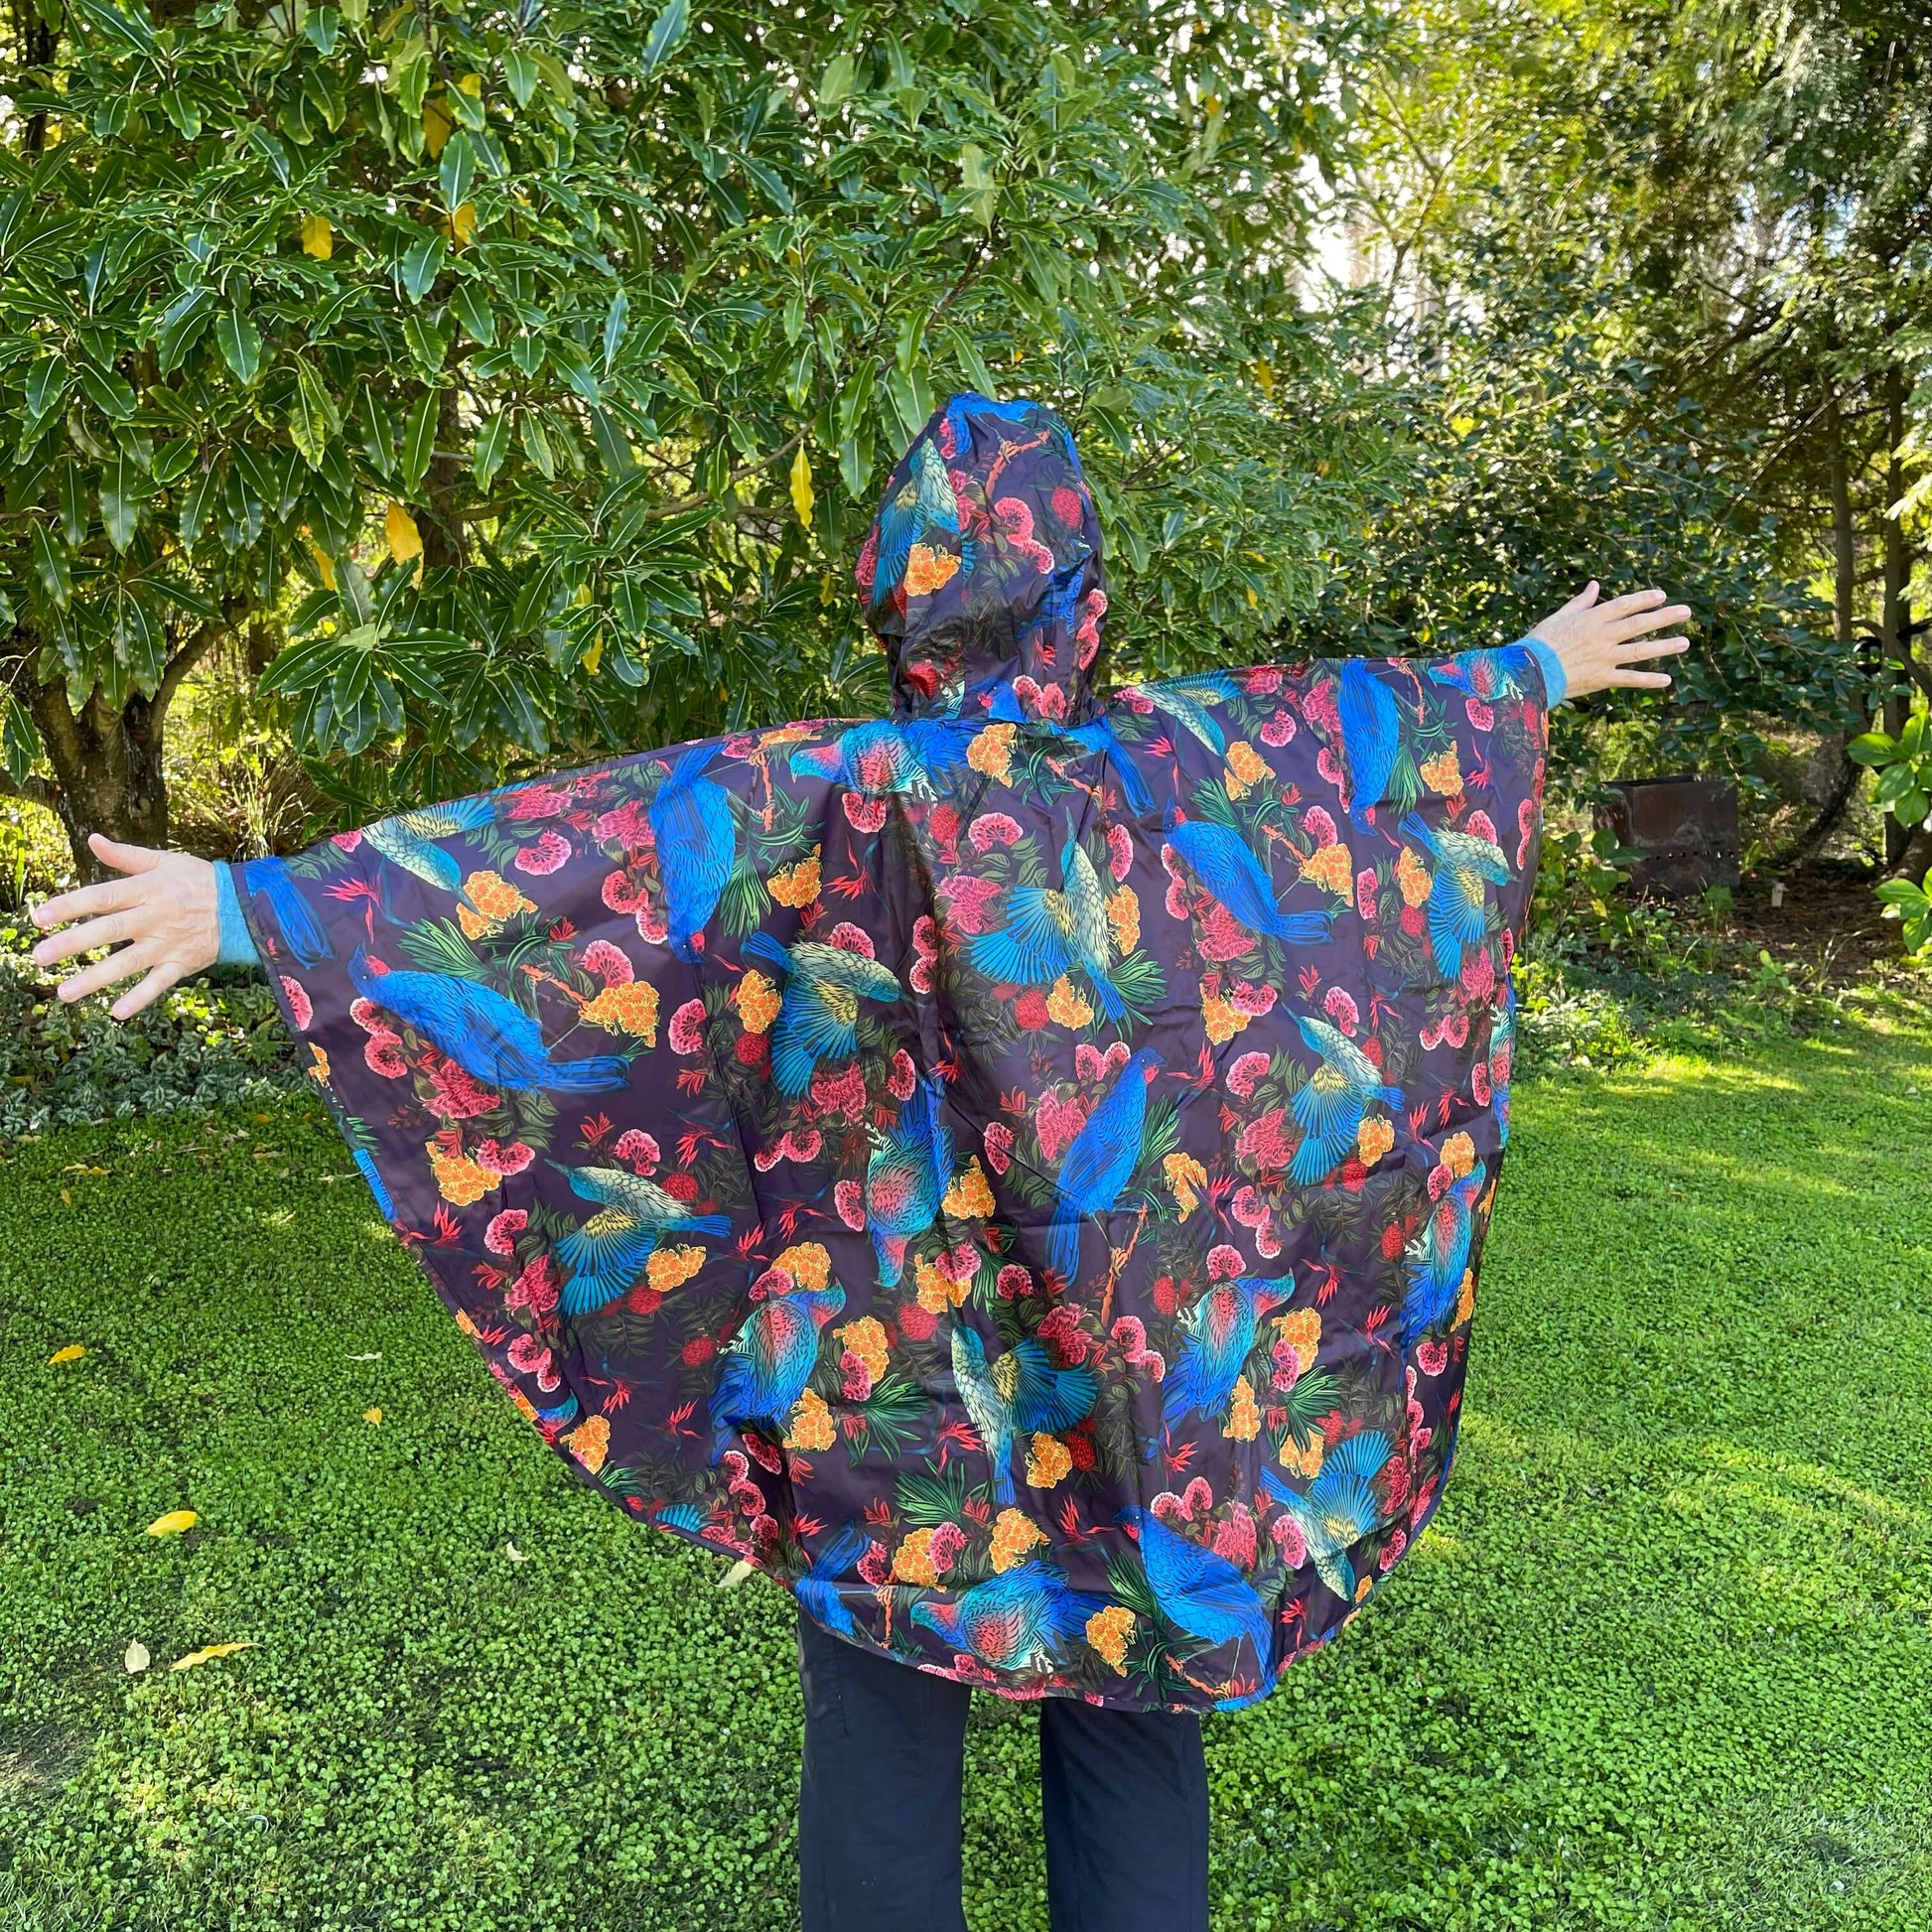 Woman wearing a rain poncho with birds and flower print on a deep aubergine purple background.